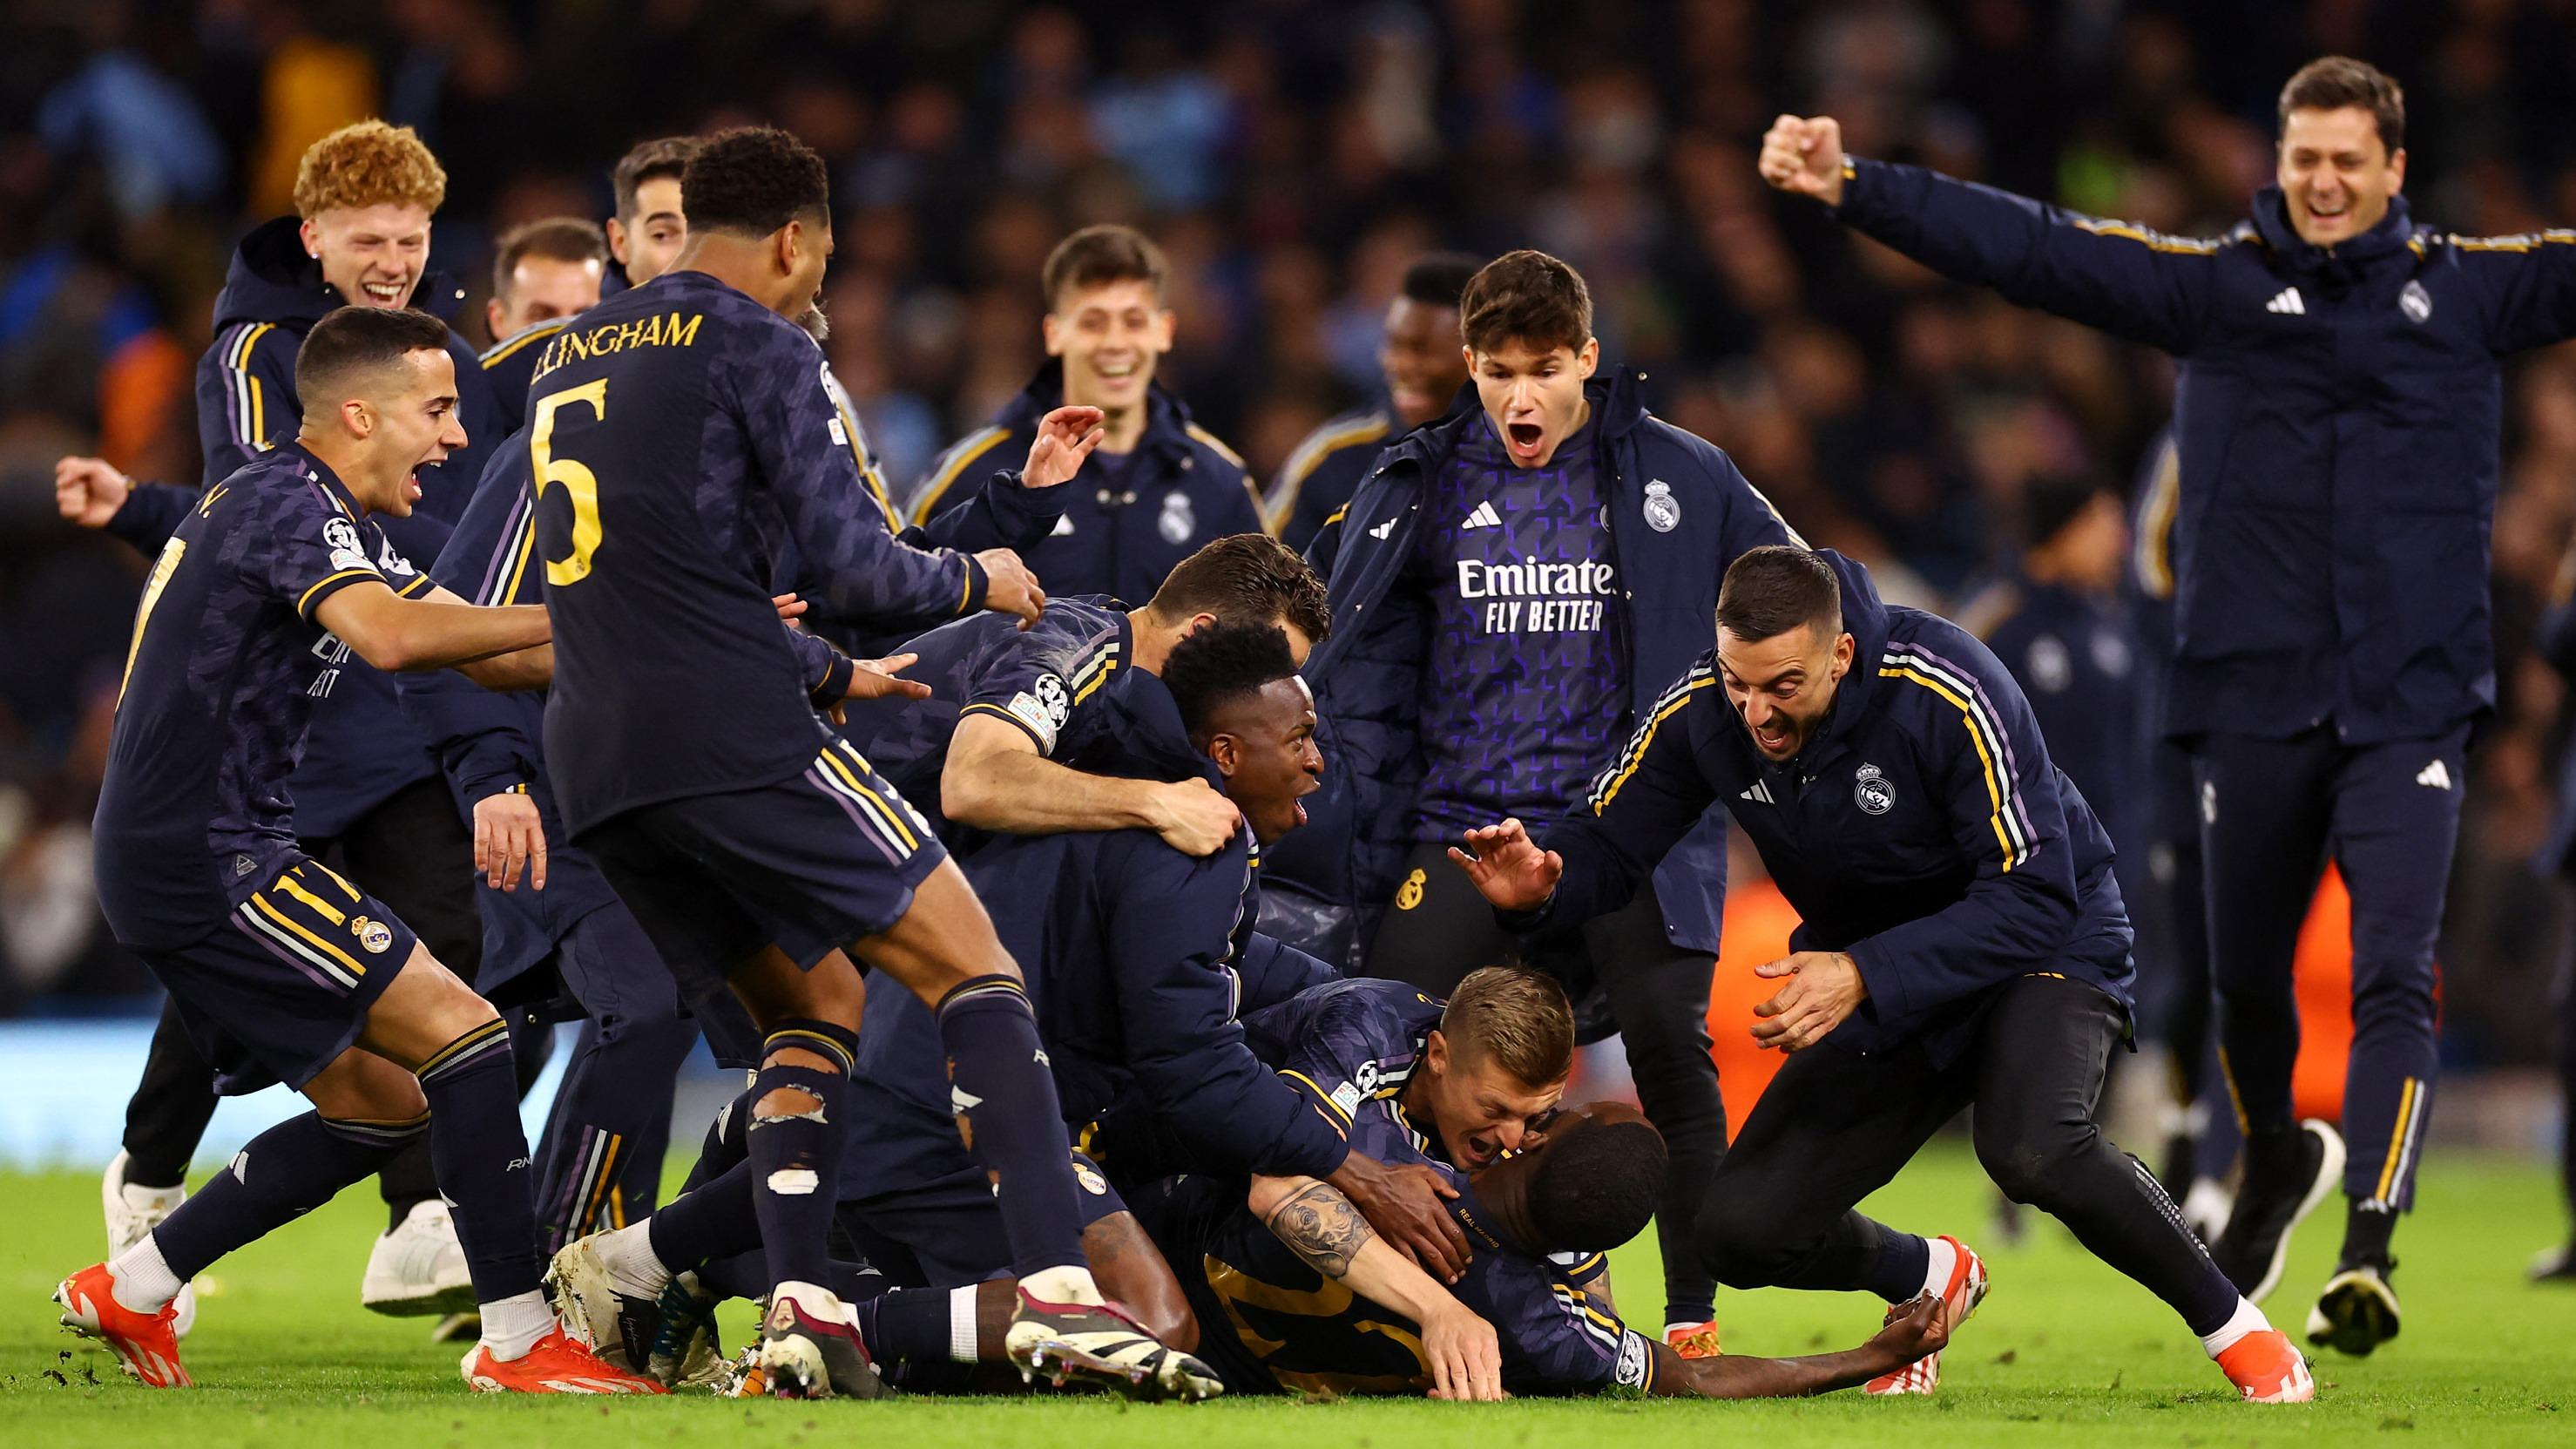 Champions League: Real Madrid eliminates defending champion Manchester City on penalties